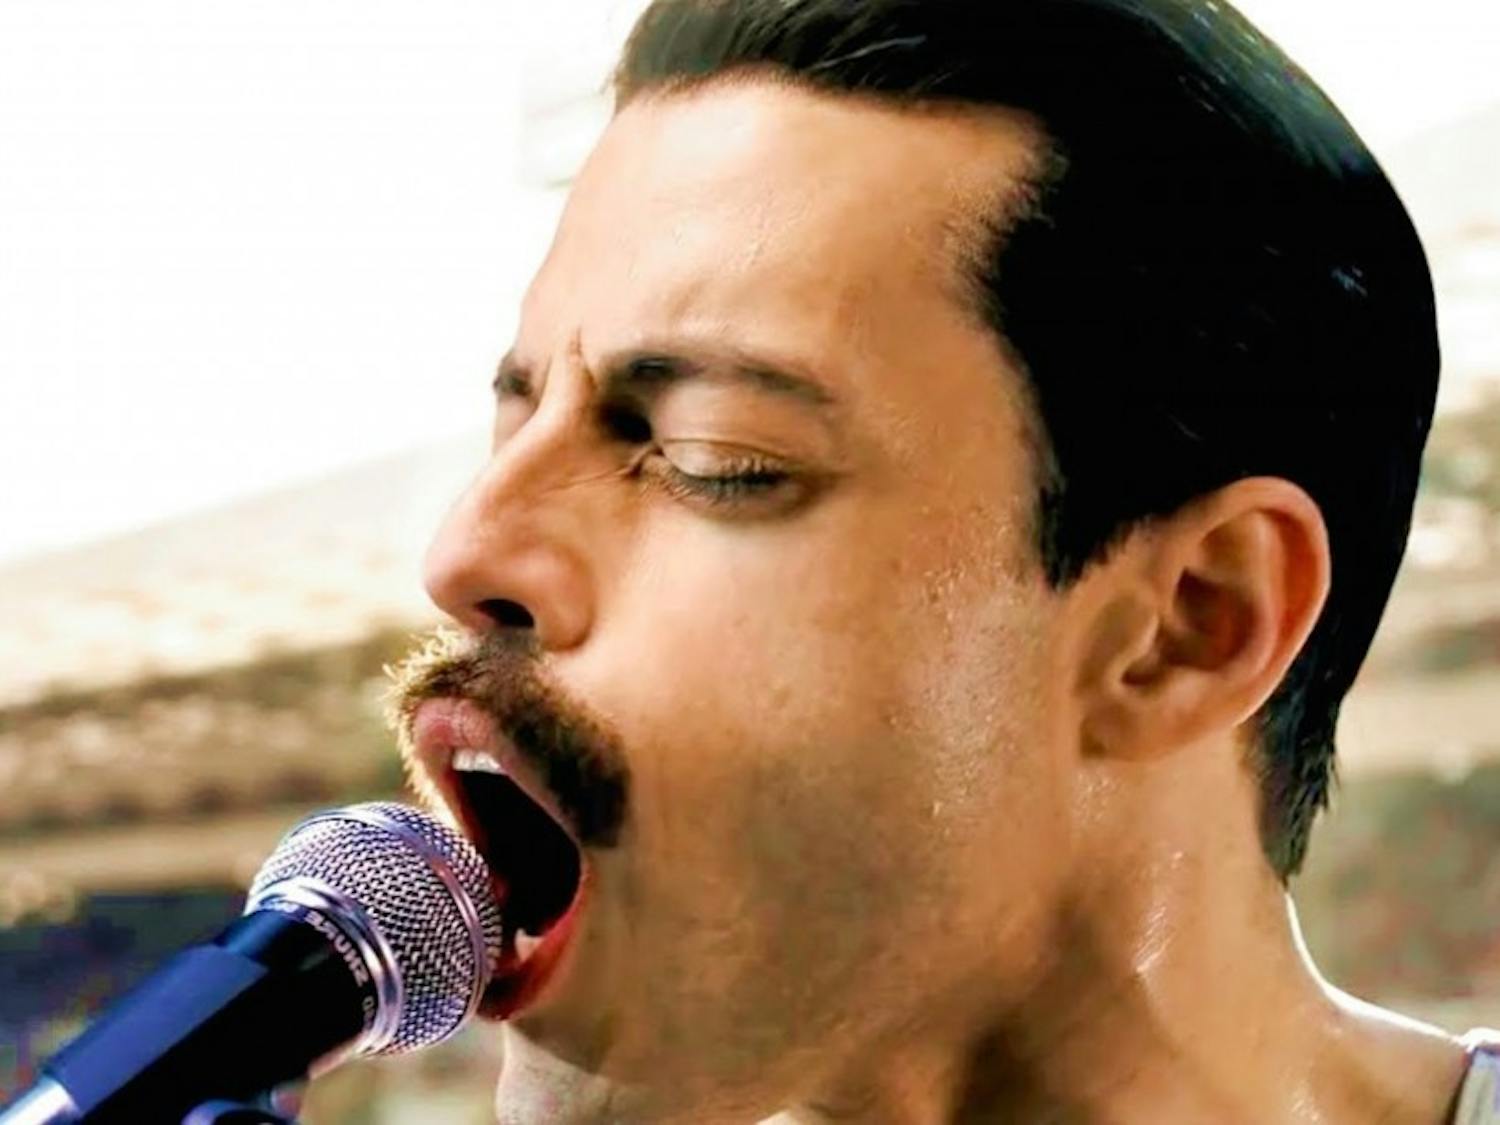 "Bohemian Rhapsody" won Best Drama Motion Picture at the Golden Globes. 